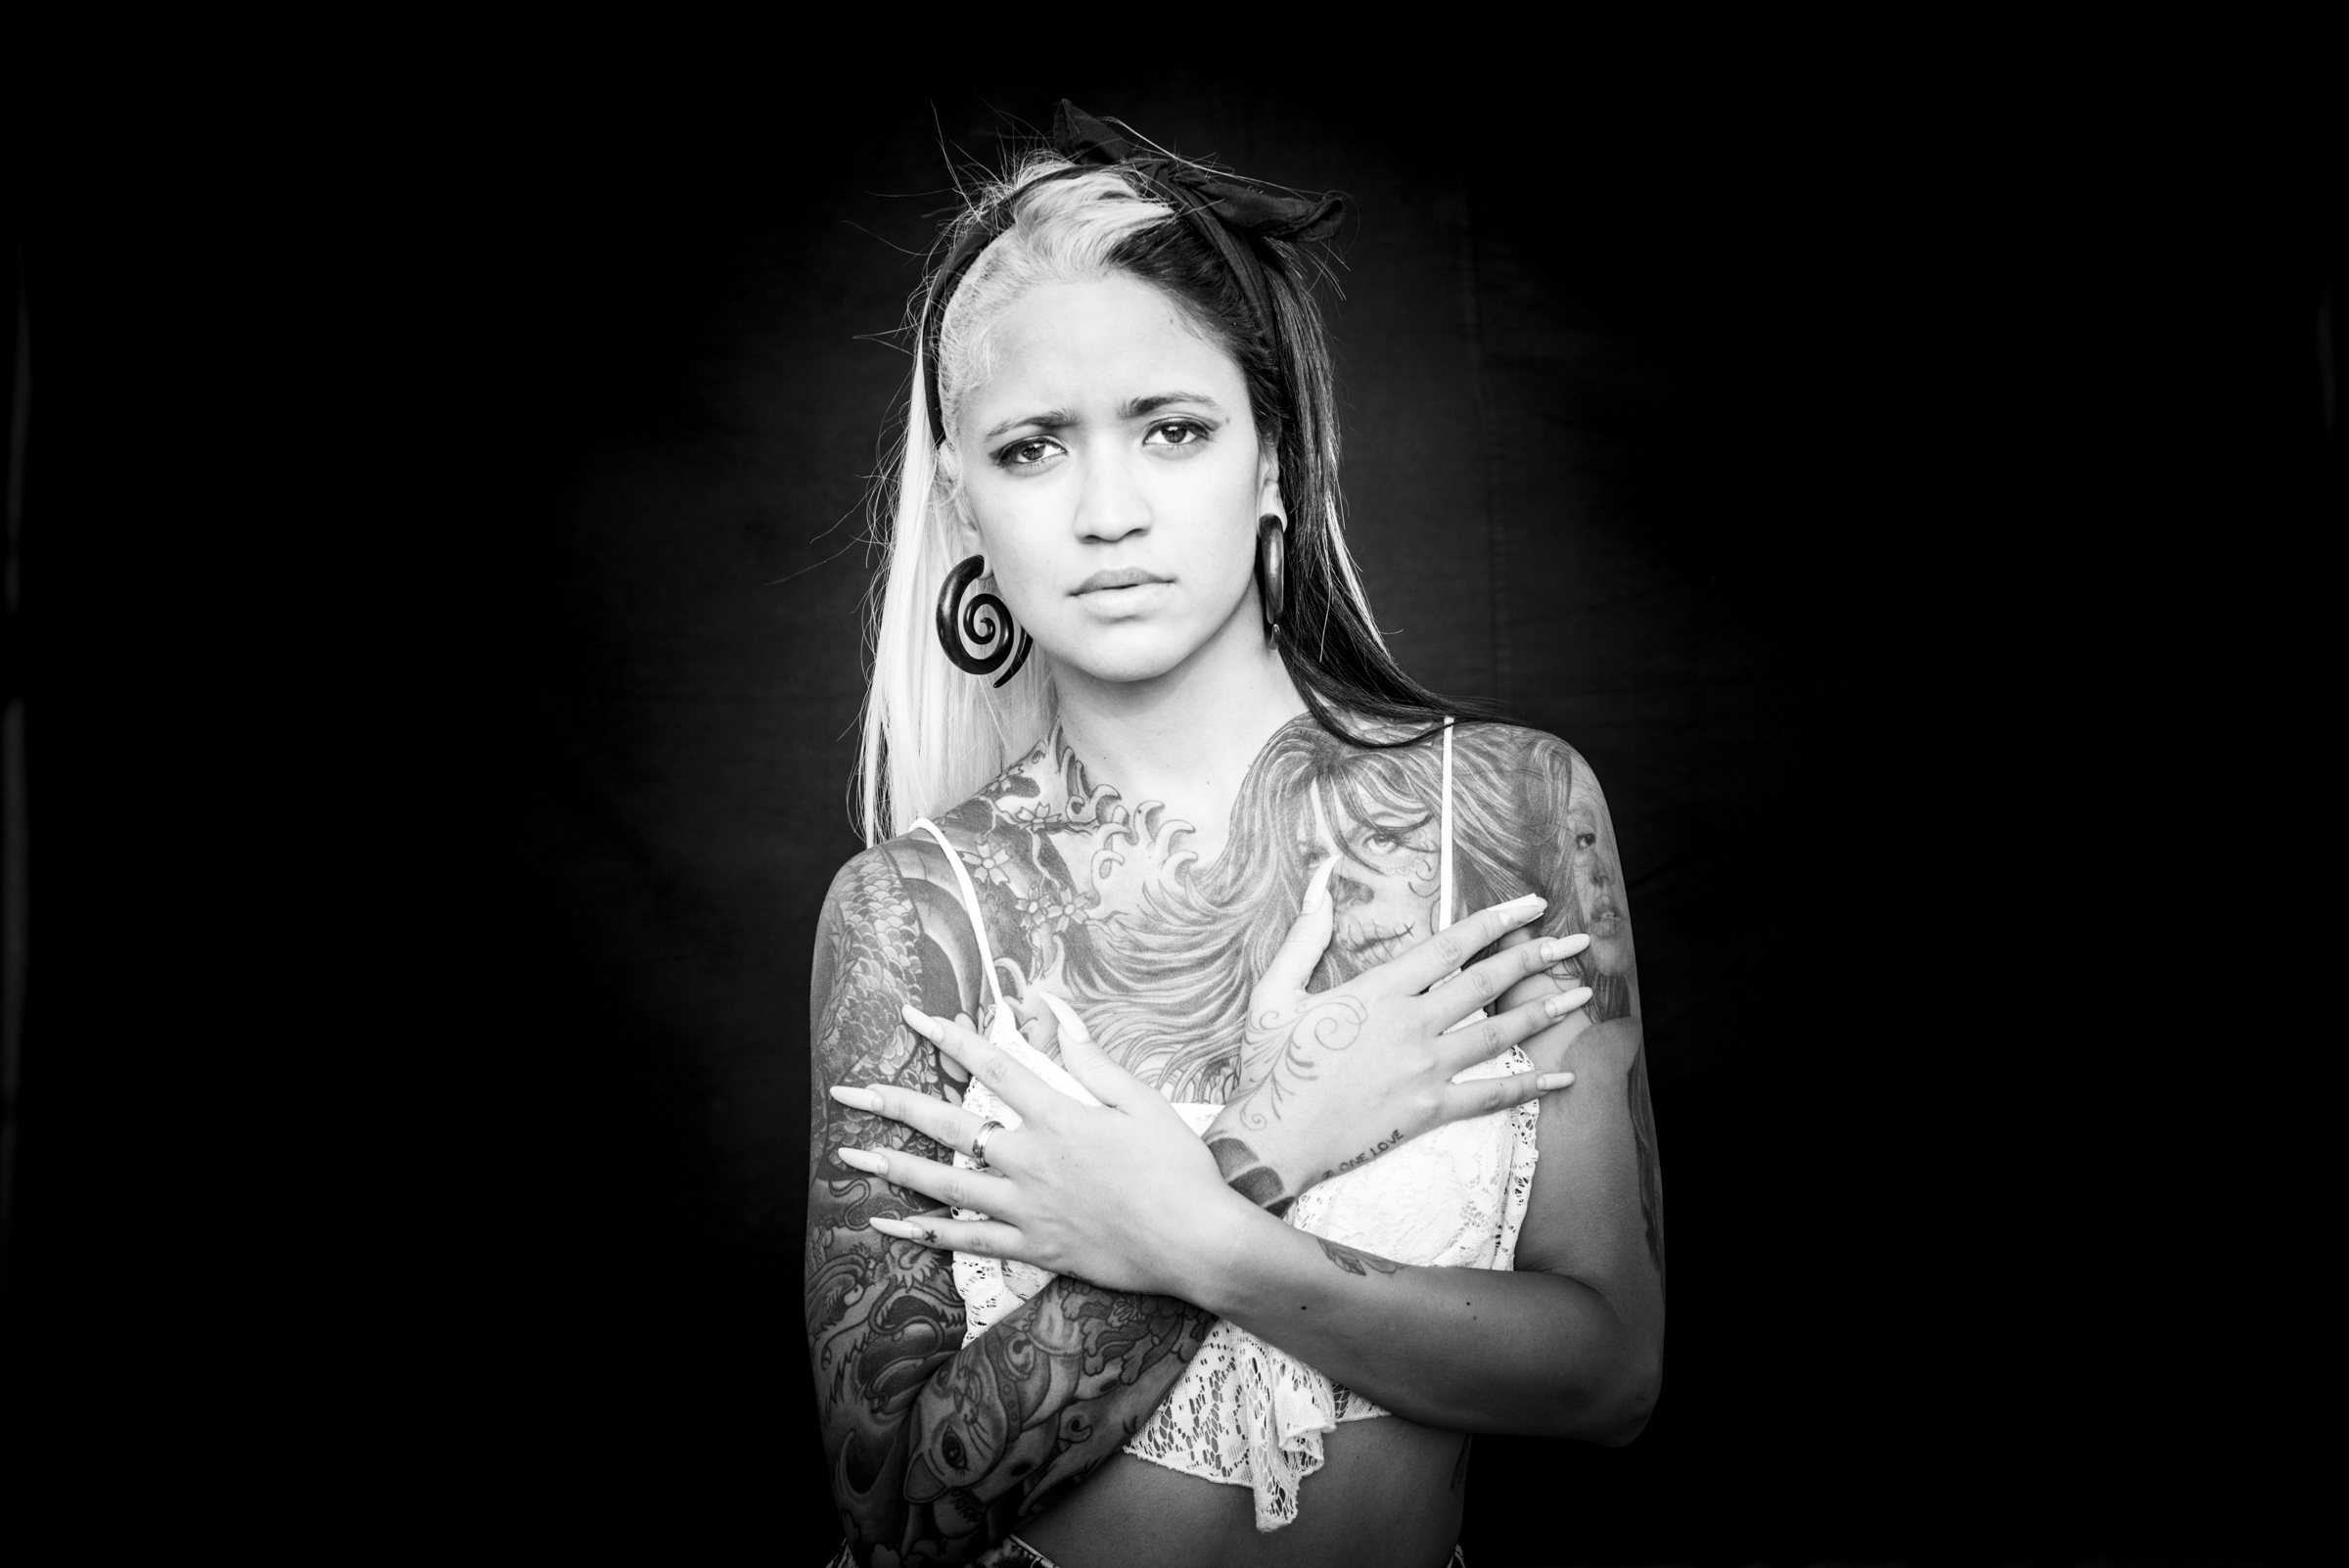 Woman with long nails and tattoos photographed on black background